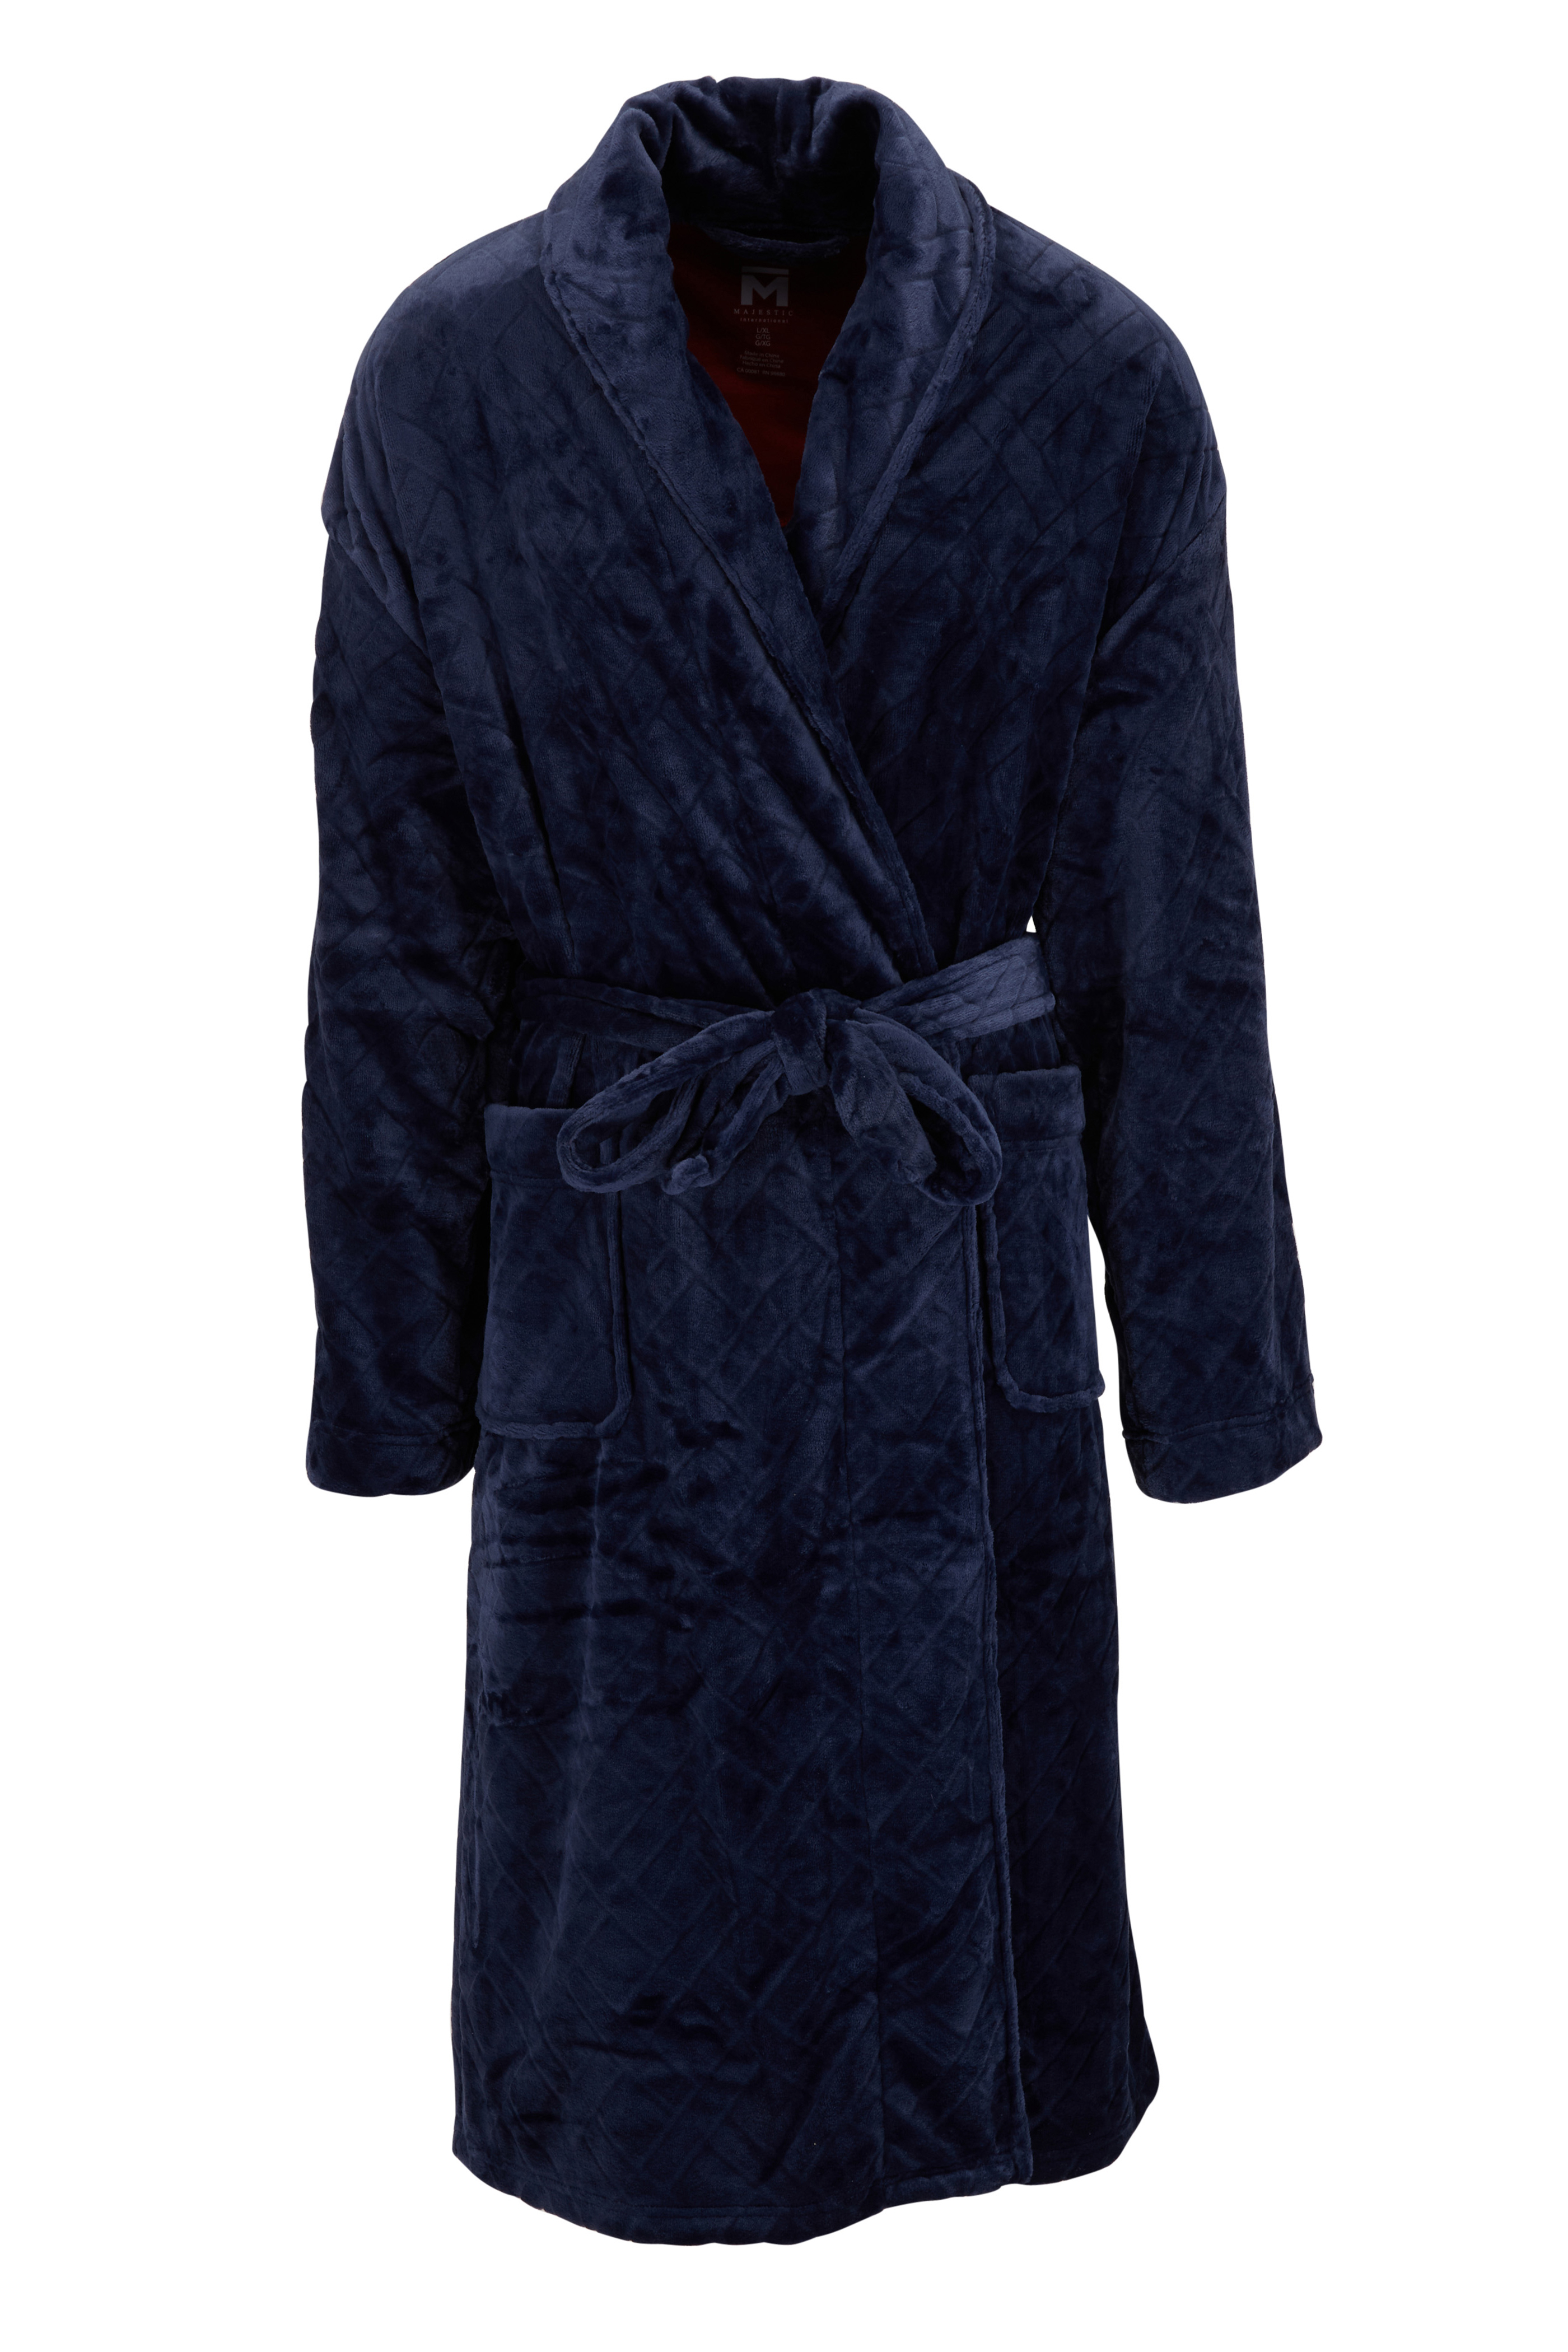 Piped waffle robe, Majestic, Shop Men's Bathrobes Online